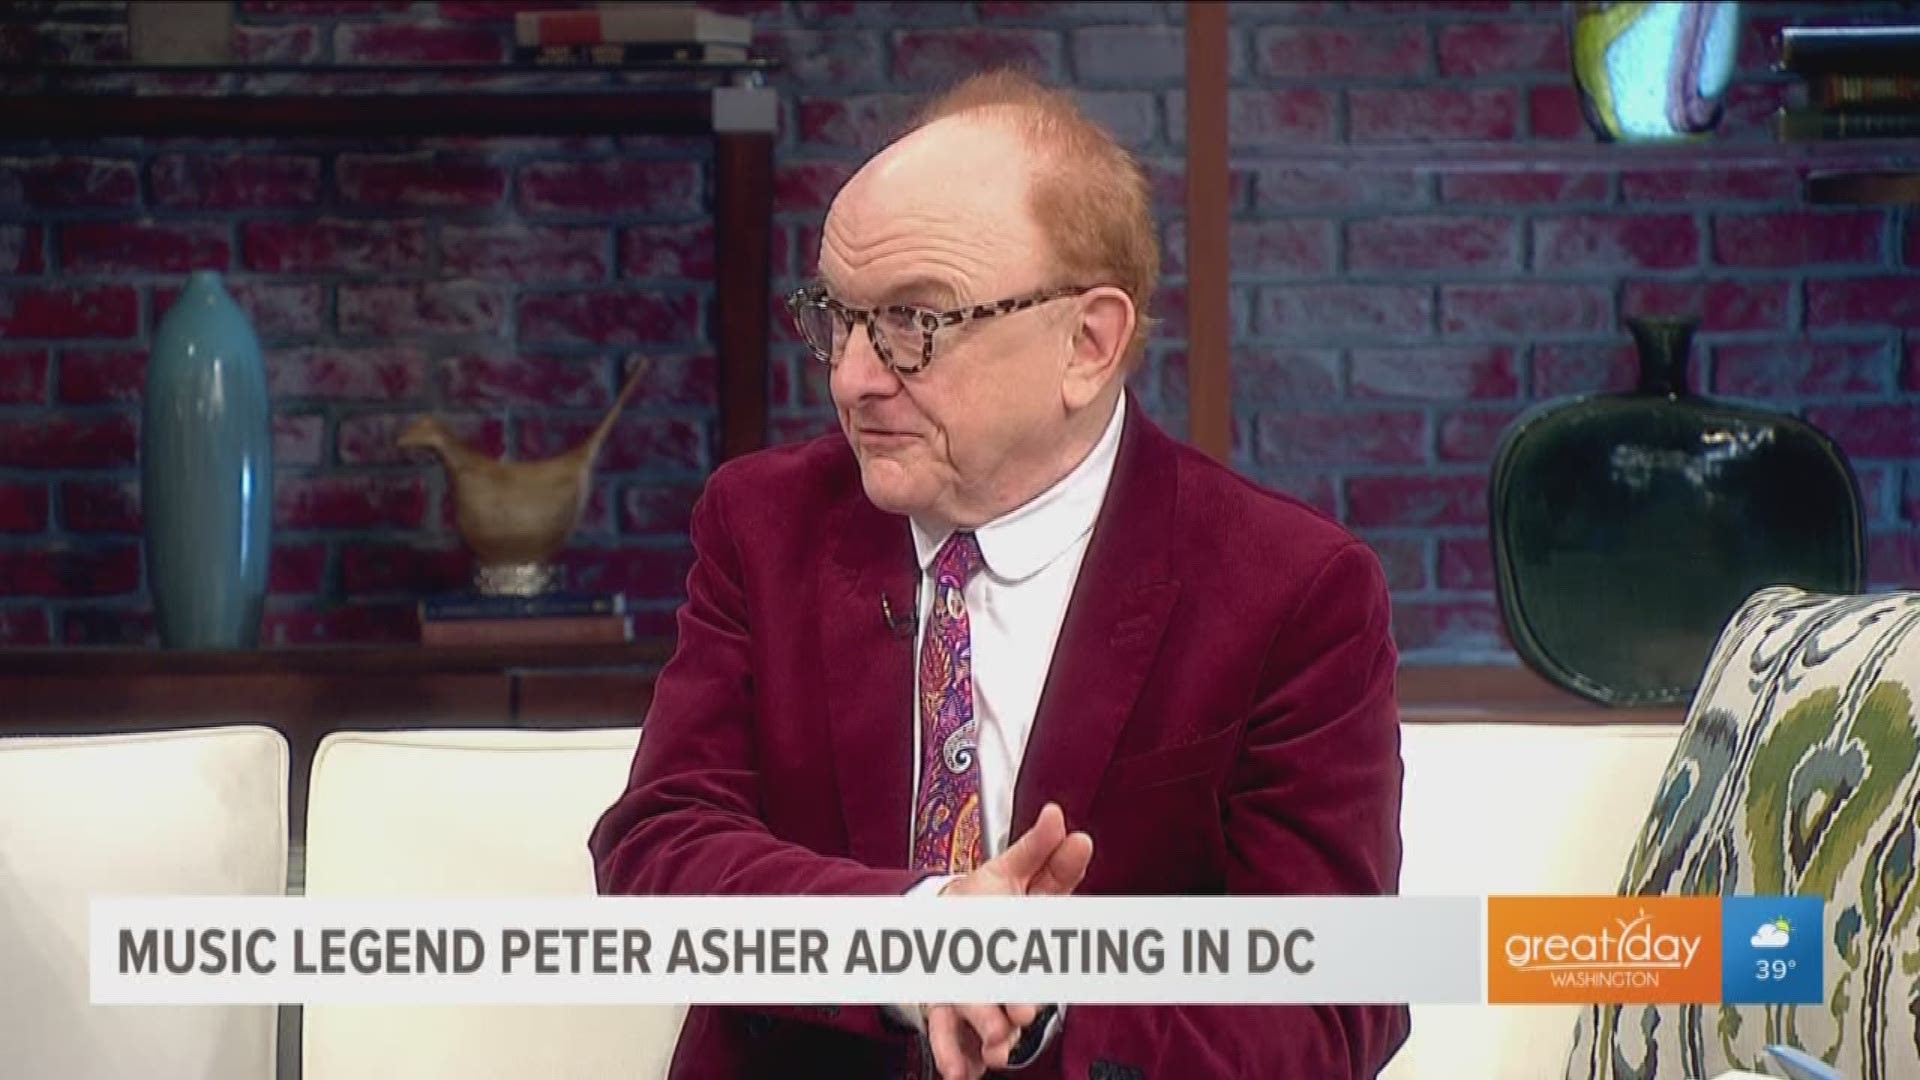 While in DC Music legend Peter Asher performed two shows and went to Capitol Hill to continue the push to get more rights for music creators with the AM-FM Act.